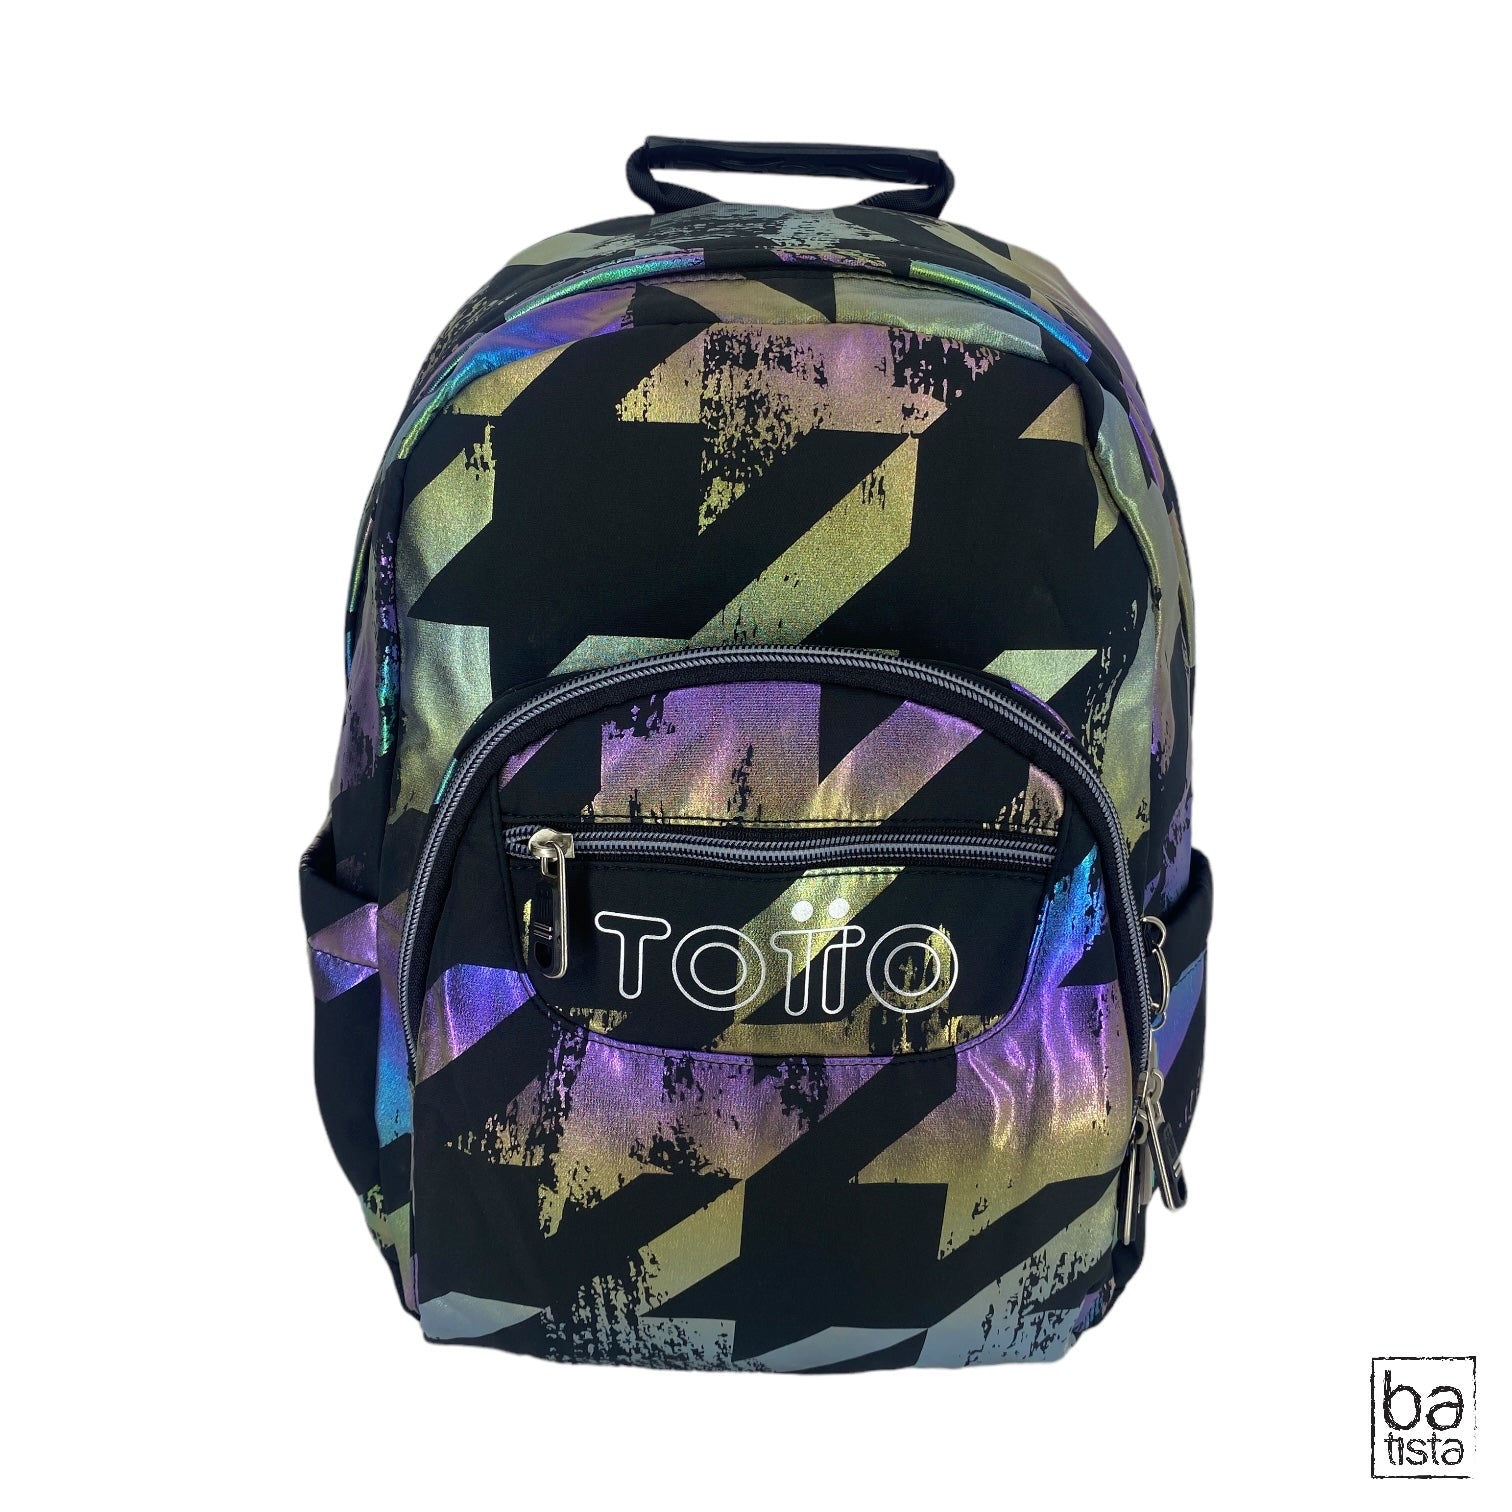 Morral Totto Gommel mediano 6CA